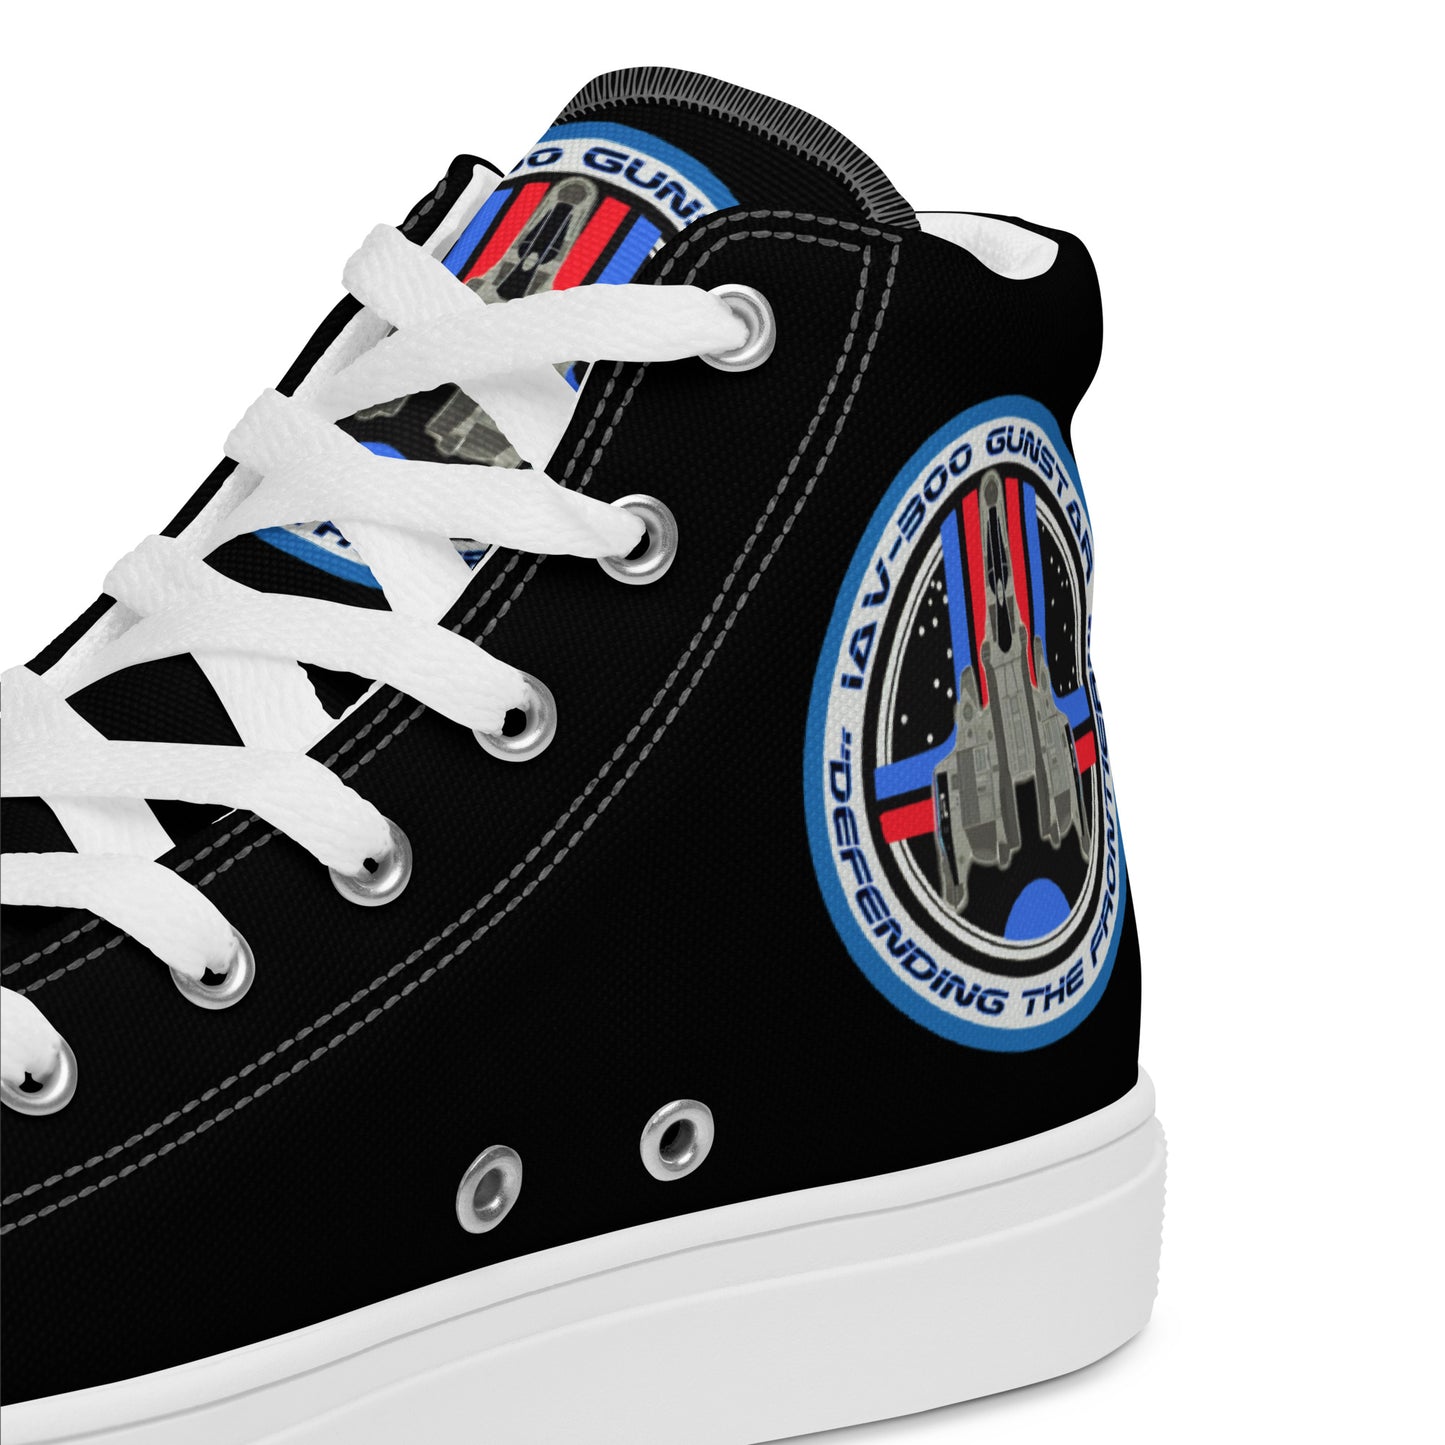 The Last Starfighter high top canvas shoes, Last Starfighter shoes, The Last Starfighter sneakers, Mens High Top Shoes, mens shoes, - McLaren Tee Hub 